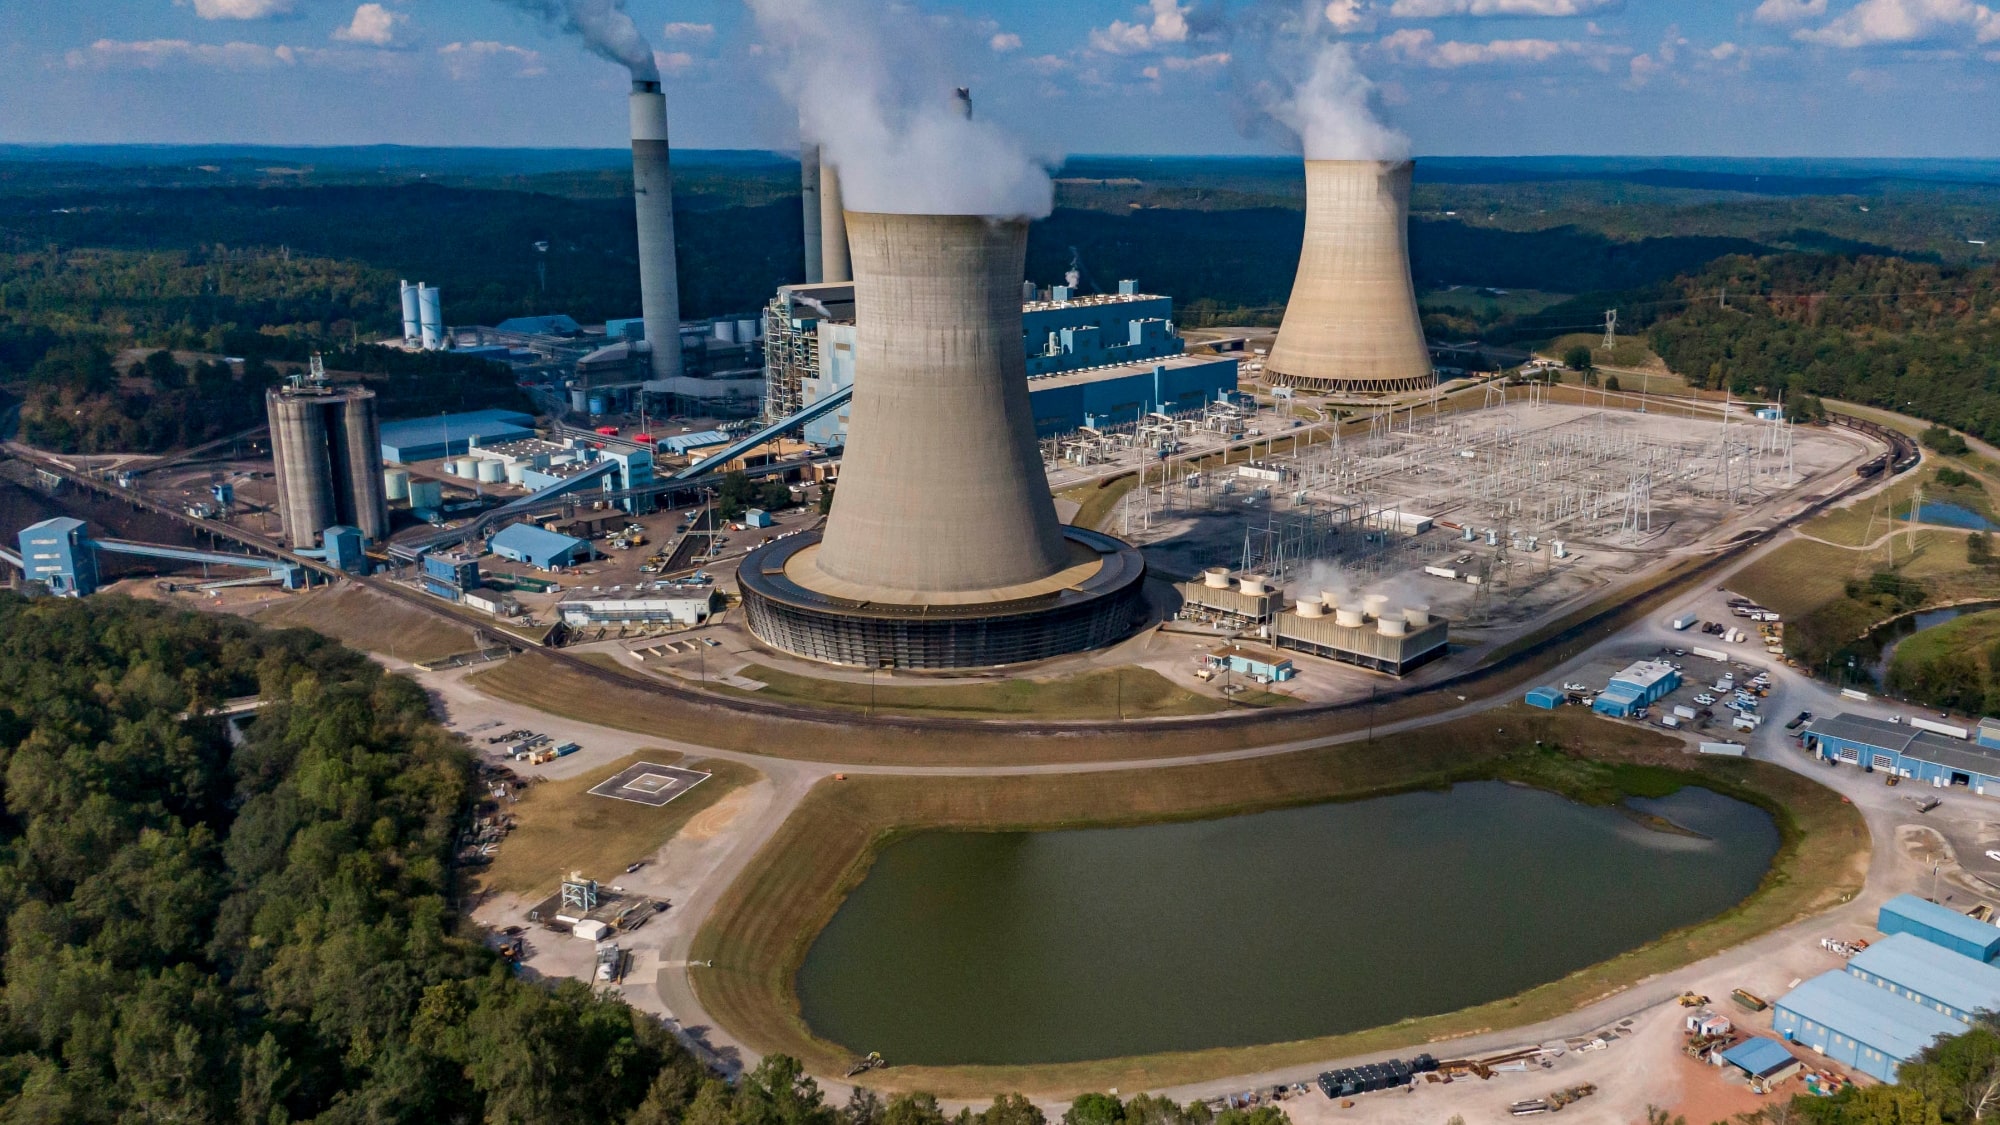 Smoke billows from a large power plant with two huge cooling towers set next to a pond.